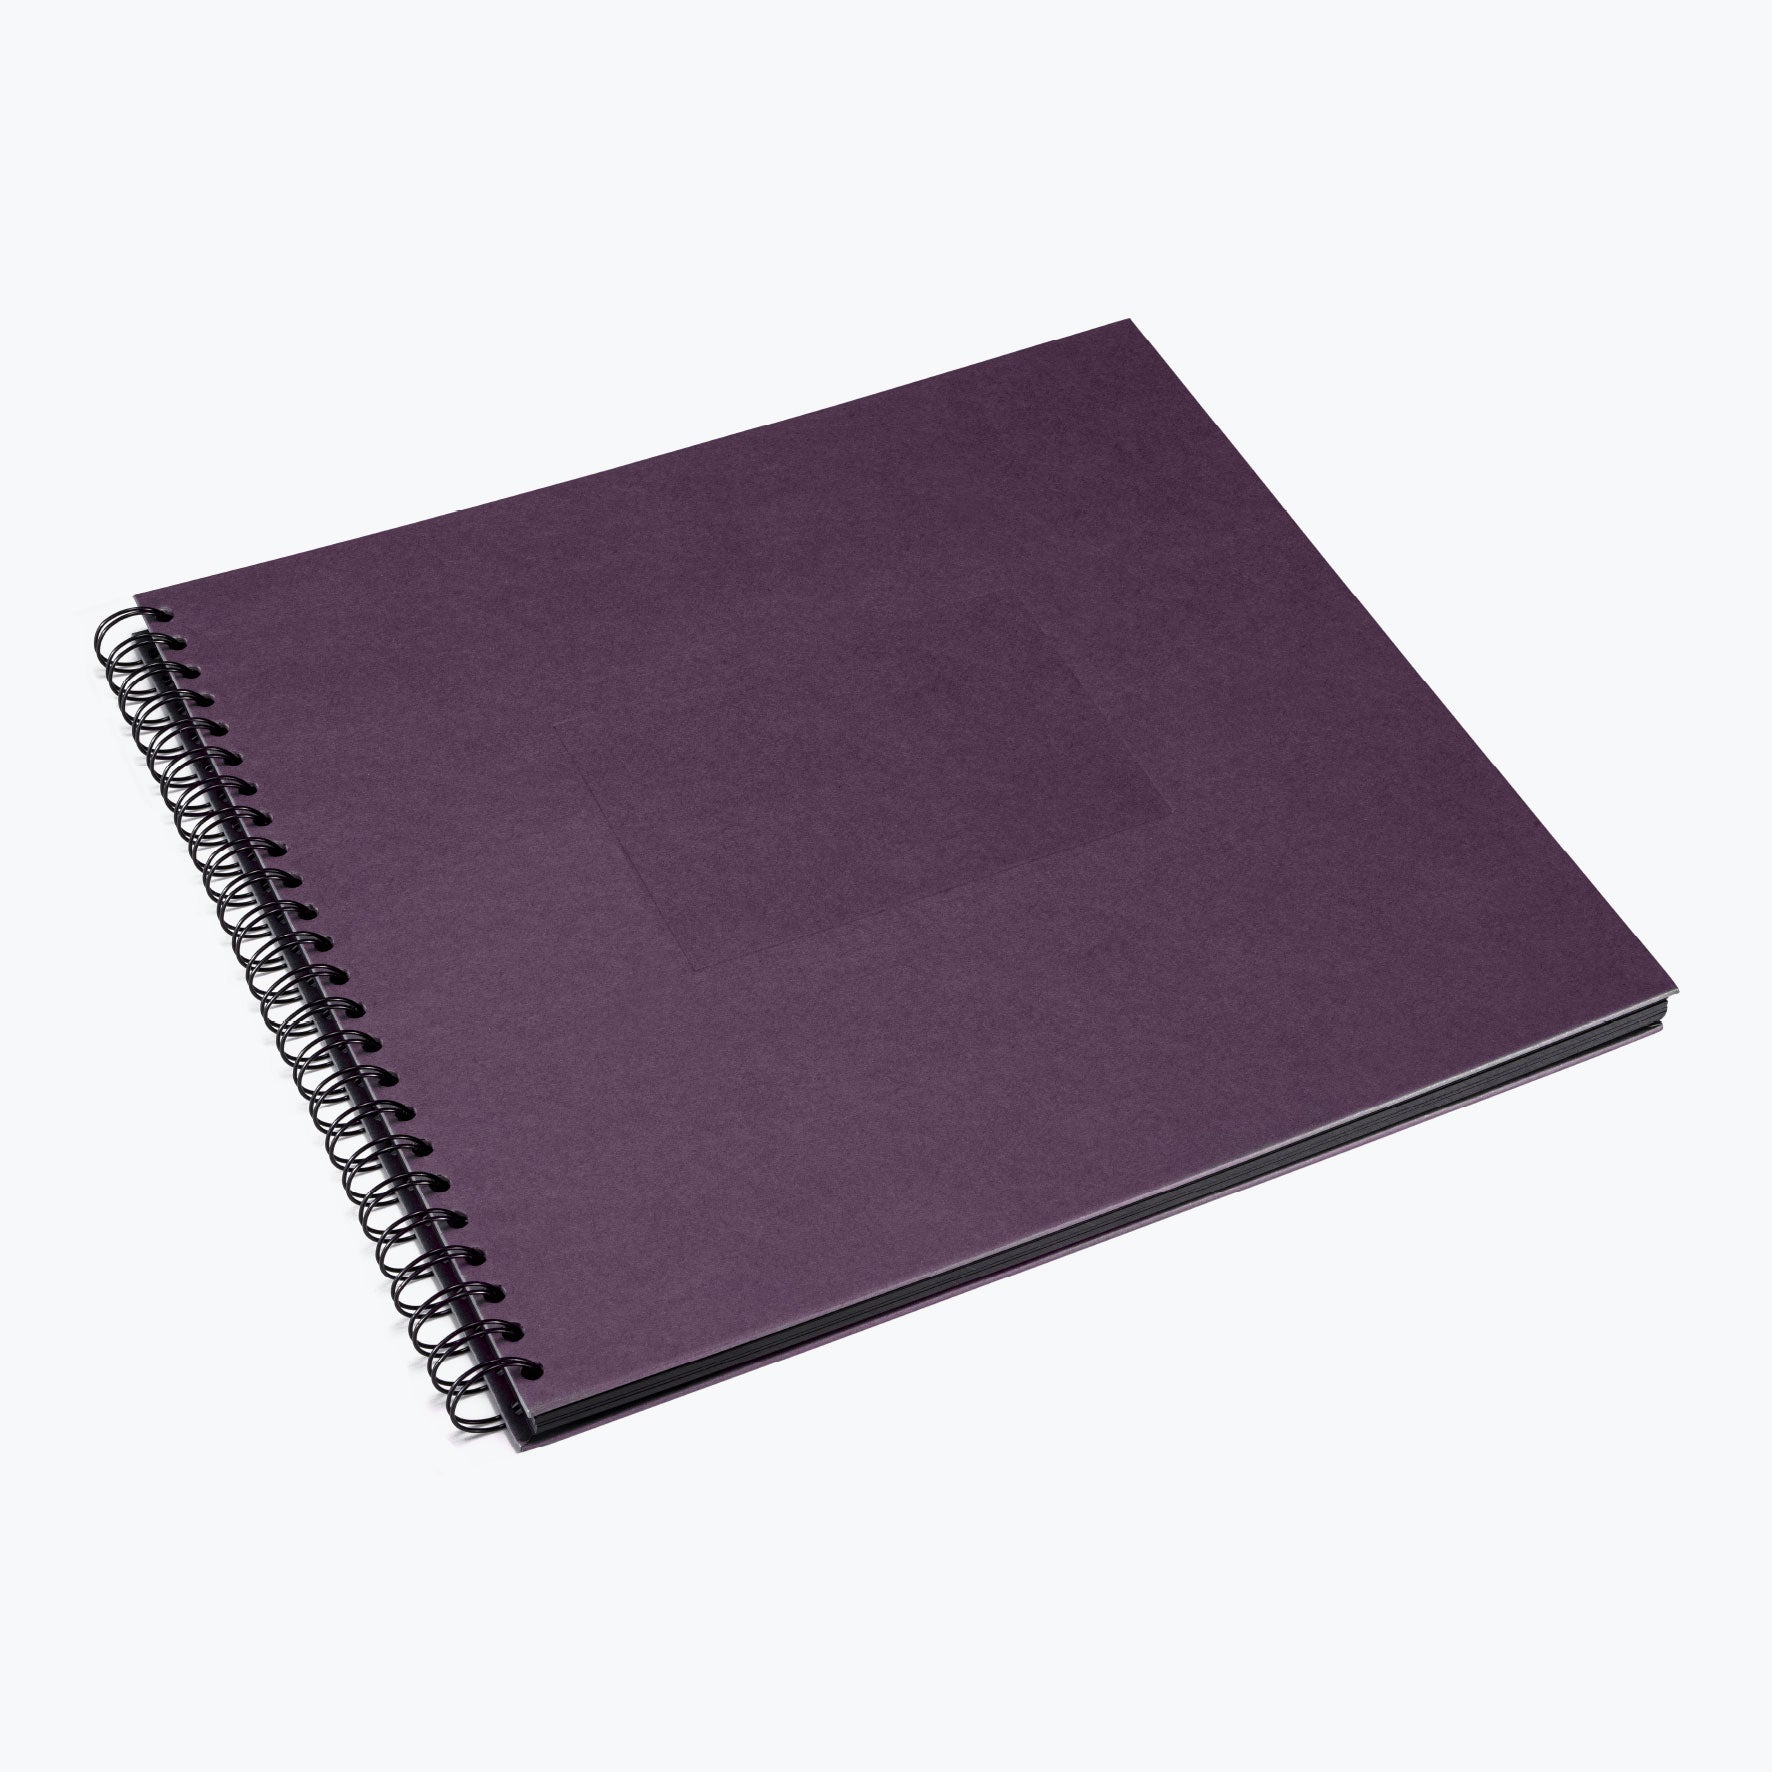 Bookbinders Design - Photo Album - Wire-O - Large - Plum <Outgoing>